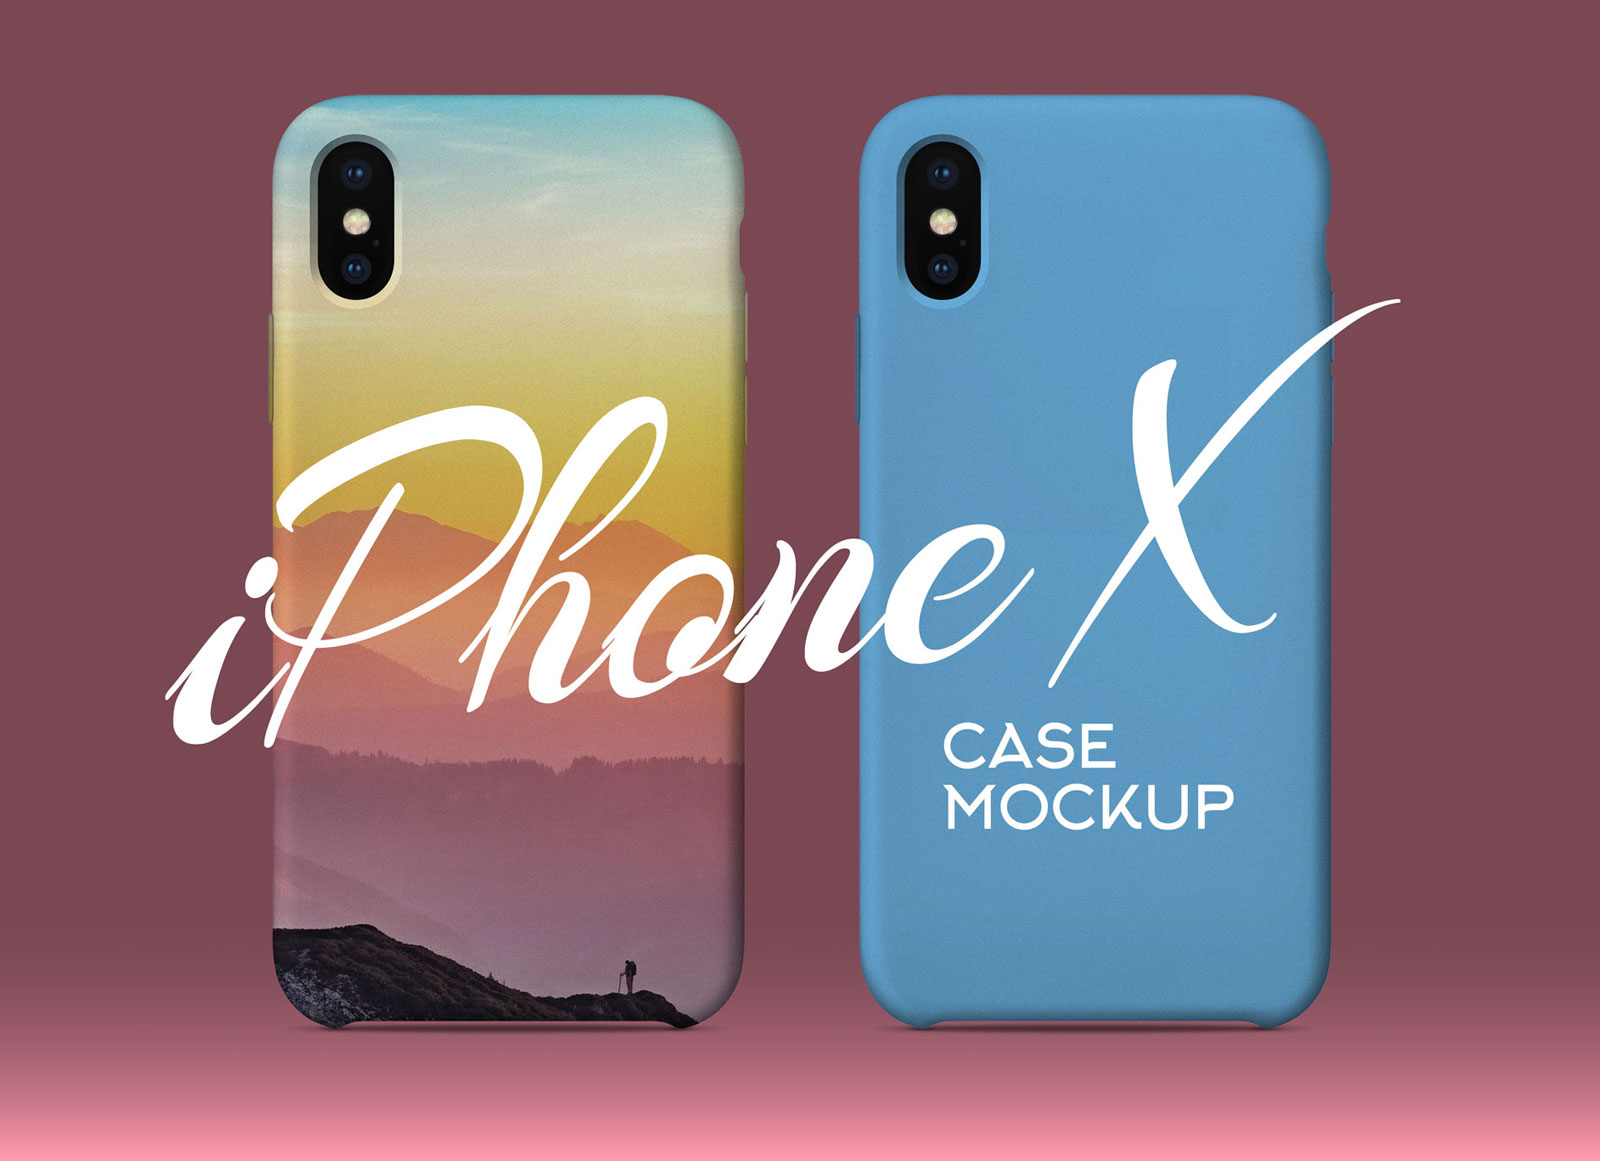 Download Free iPhone X Silicon Case Back Cover Mockup PSD - Good ...